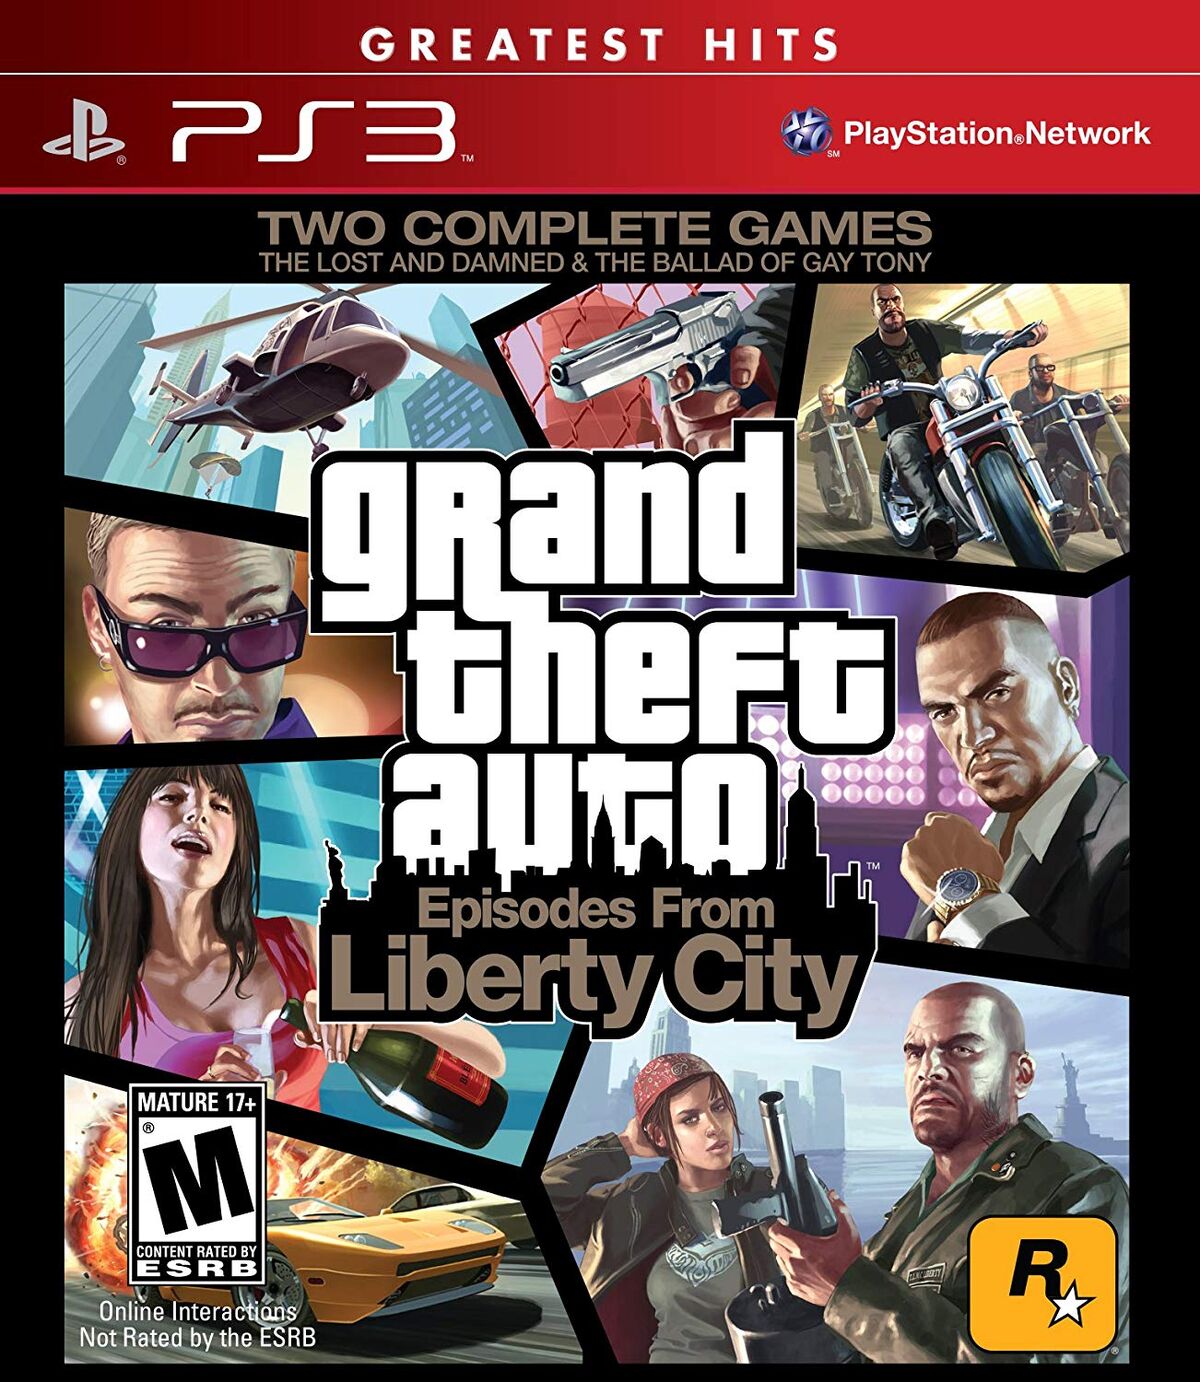 Grand Theft Auto: Liberty City Stories - Music from Head Radio (Original  Video Game Soundtrack) - Compilation by Various Artists